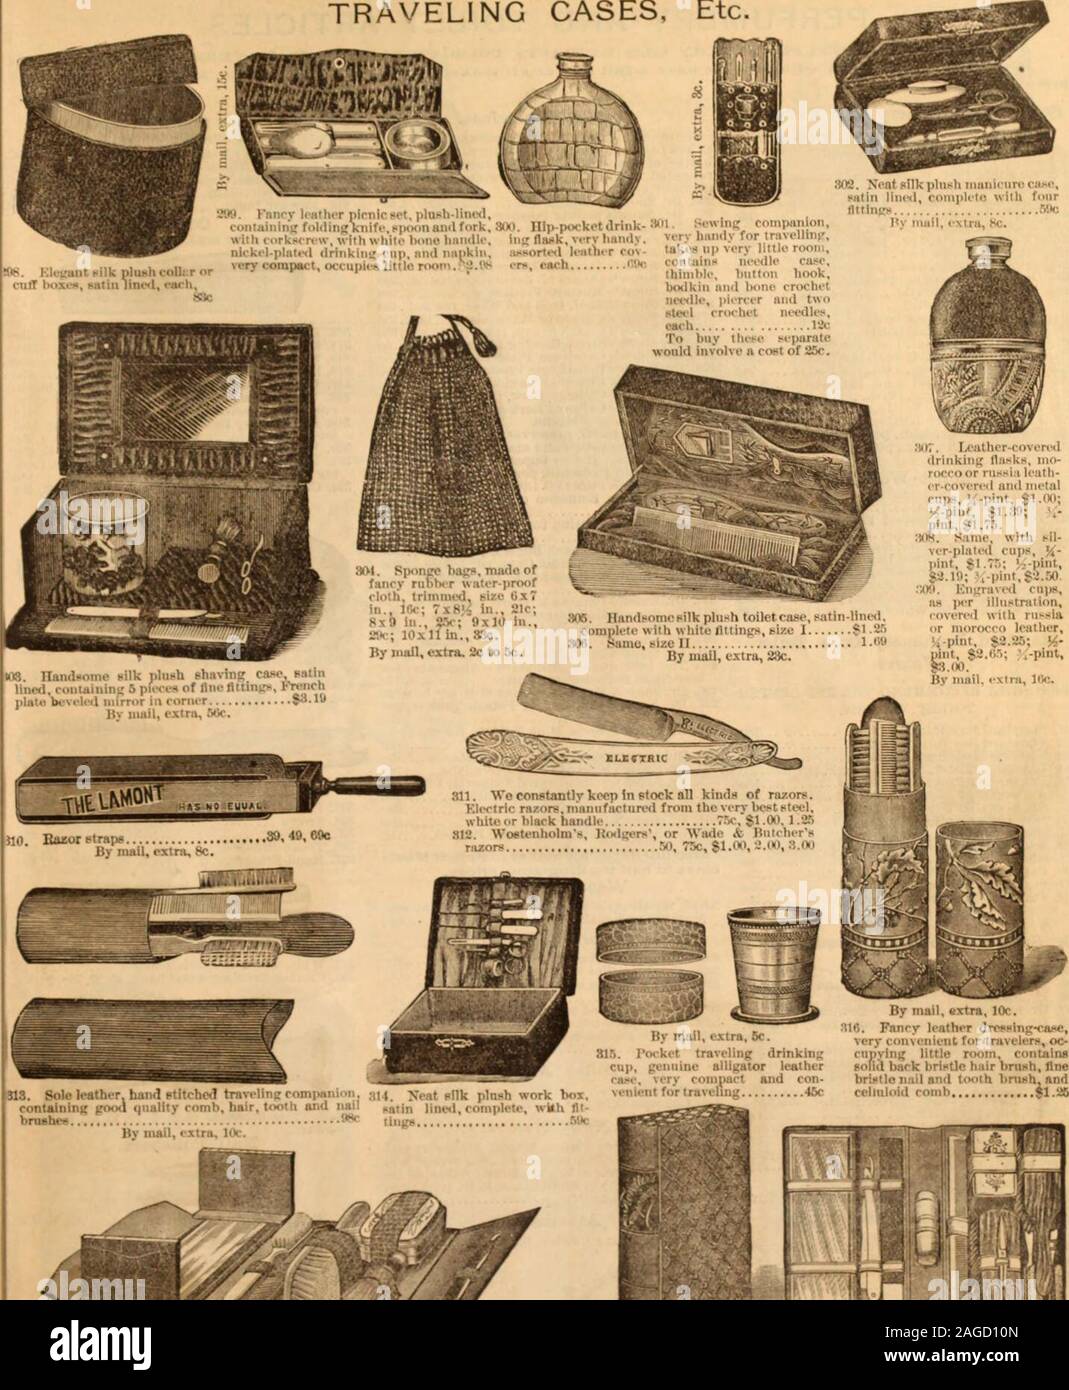 illustrated fashion catalogue summer 1890 and portfolio combined of em boaaajj leather has poafcm forpax r and envelopes also a blotterstamp box ink w 11 pen holdercalendar and lx k and key hav iiil had these ina1 up in verylarge quantities we are enabled tosell them at the very low price ofwc postage 3c 6 favorite lap tablet and port folio combined of knelili clothhas pockets for paper and envel opes also blotter and stamp boxink well gten holder and cal tber 97 neat calf leather pocket ixxdc lea ther lined coin purse inside with pat lt nt lx k si 2AGD10N